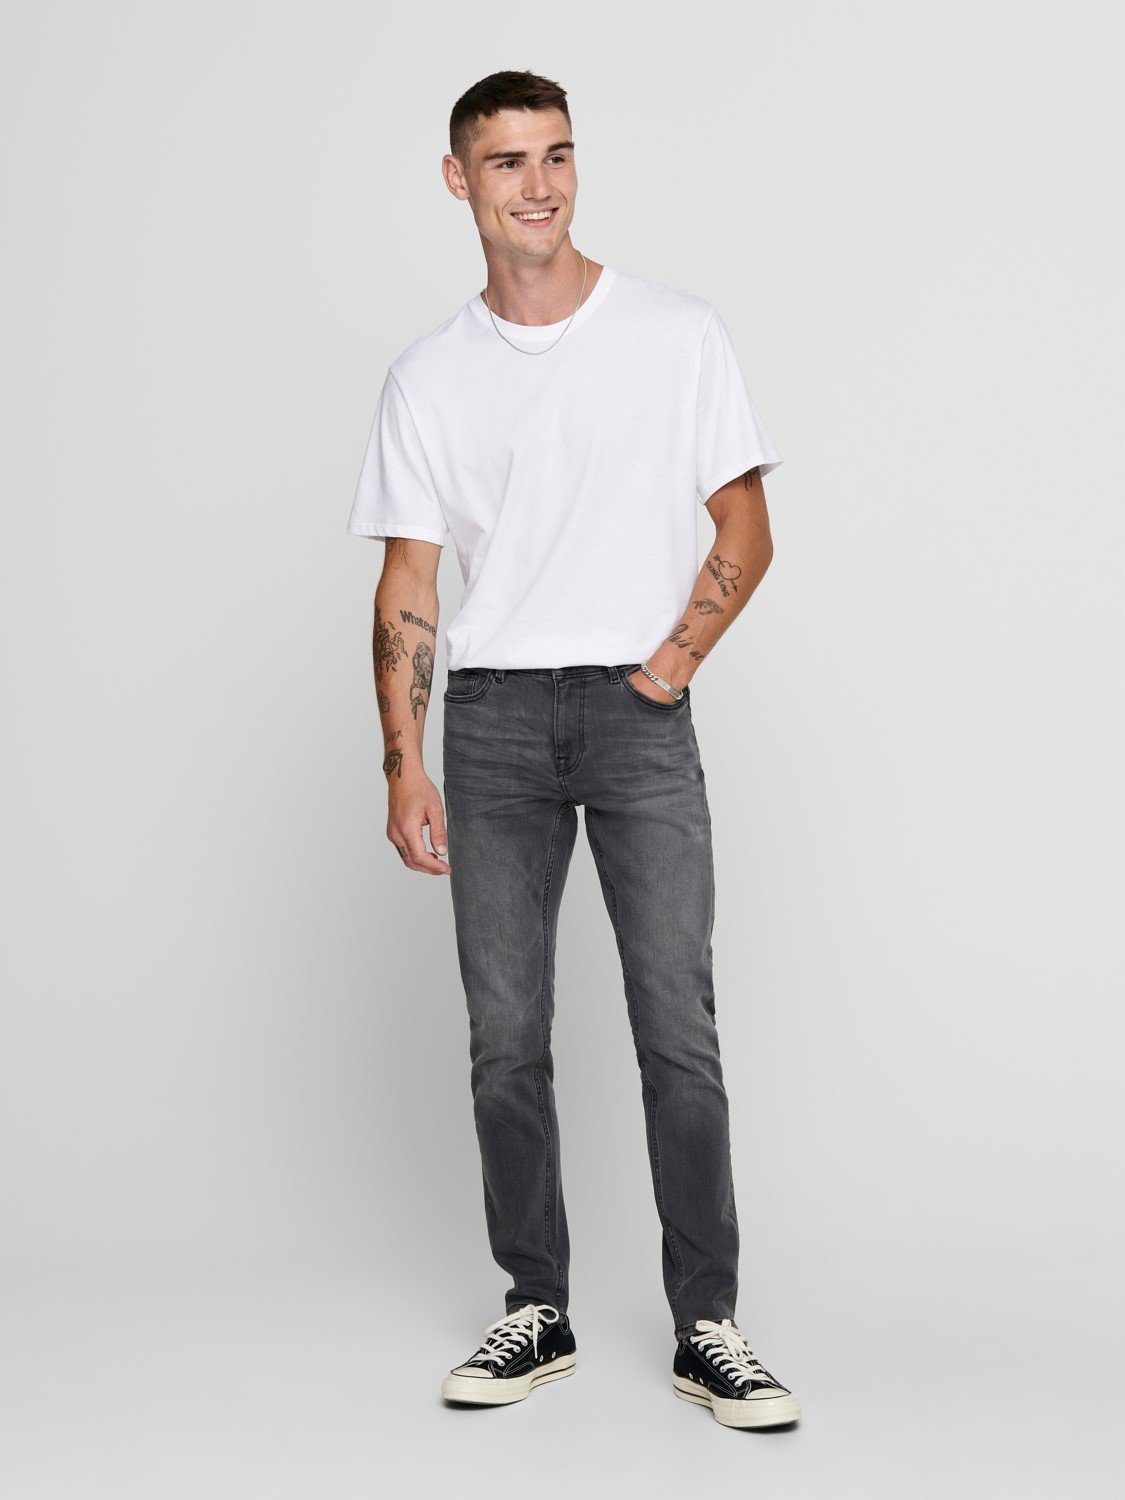 Denim Grau Washed Fit Pants Basic SONS Slim-fit-Jeans Stoned & ONSWARP in 3977 ONLY Hose Skinny Jeans (1-tlg)